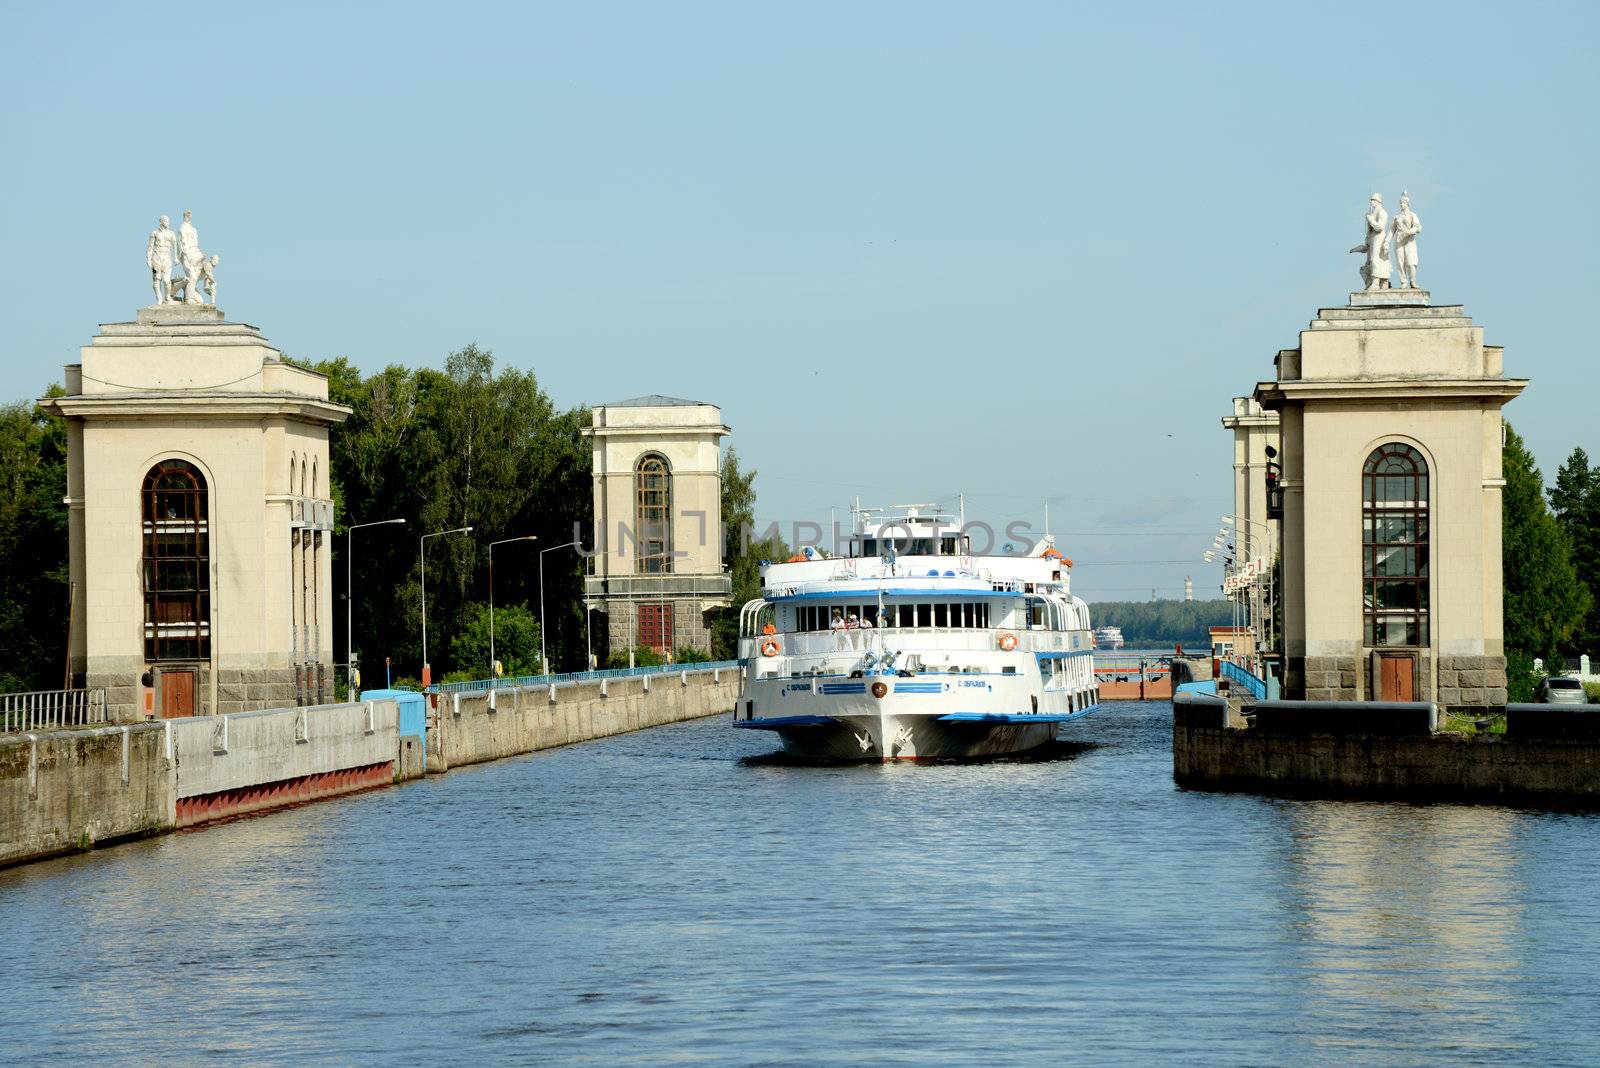 River cruise ship in the lock of Moscow canal, Russia. Taken on July 2012.